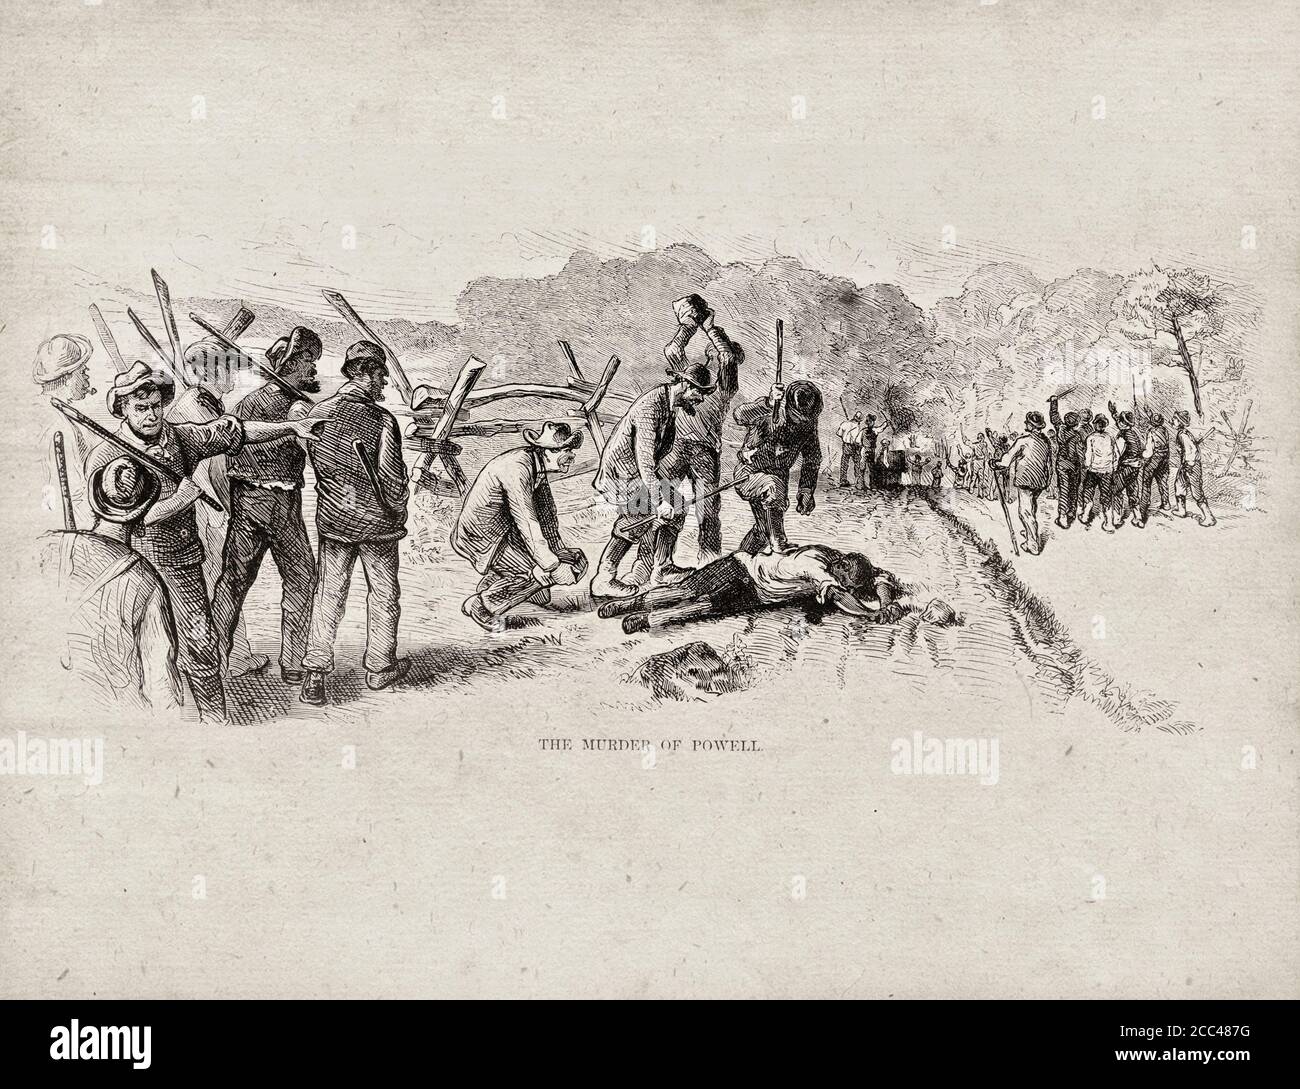 The Murder of Powell. USA. 1872 Illustration shows a group of Irish immigrant workers with clubs standing over the body of African American laborer De Stock Photo